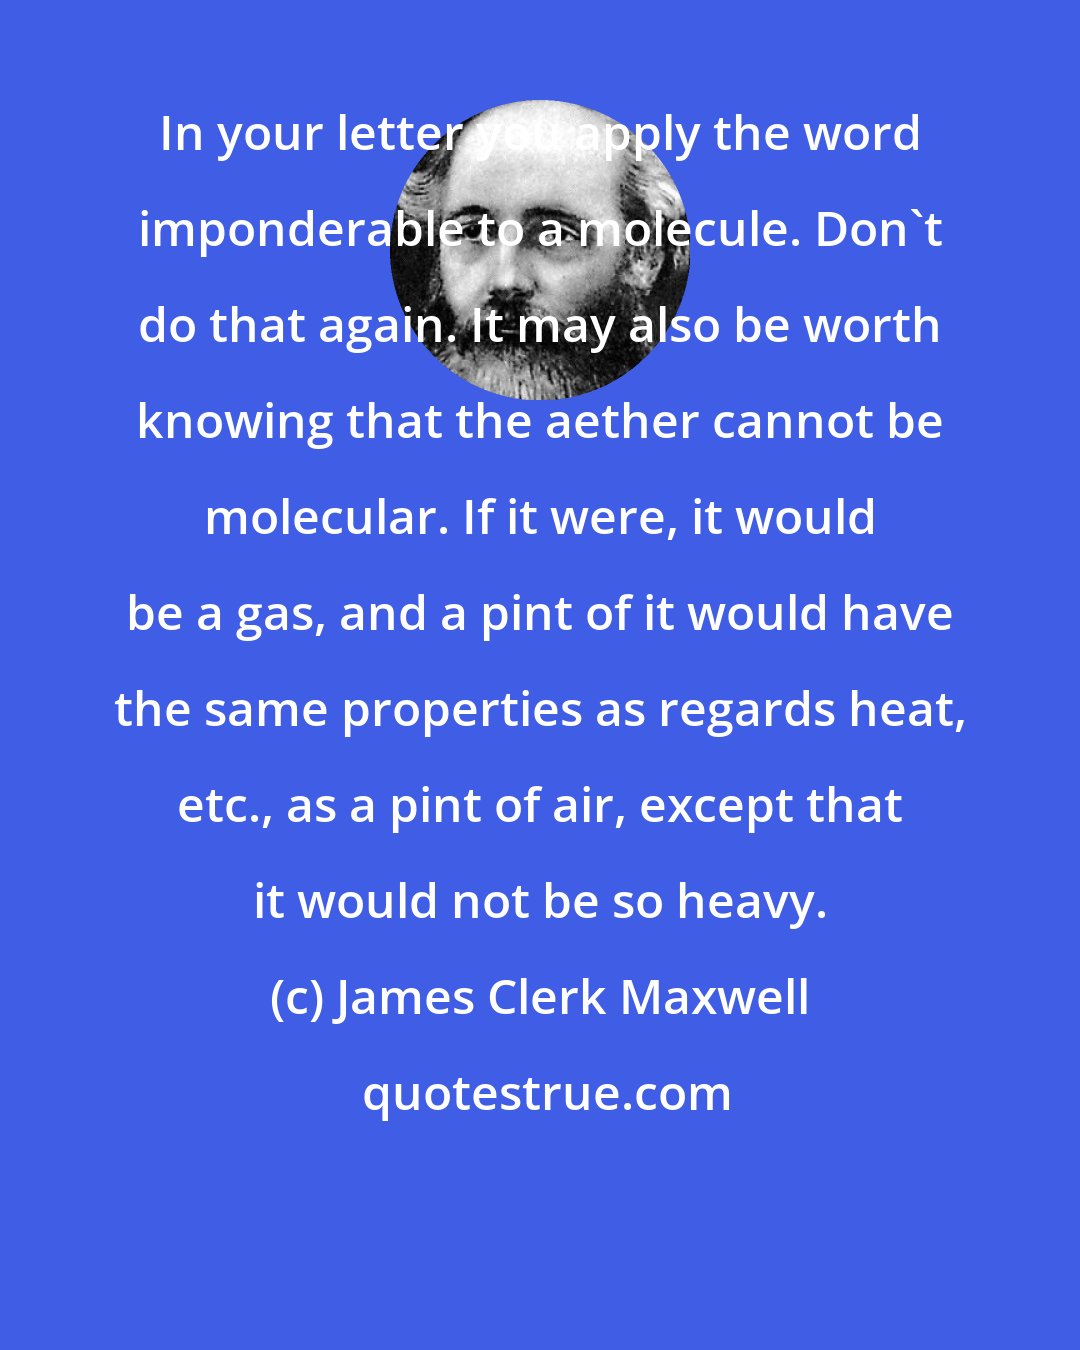 James Clerk Maxwell: In your letter you apply the word imponderable to a molecule. Don't do that again. It may also be worth knowing that the aether cannot be molecular. If it were, it would be a gas, and a pint of it would have the same properties as regards heat, etc., as a pint of air, except that it would not be so heavy.